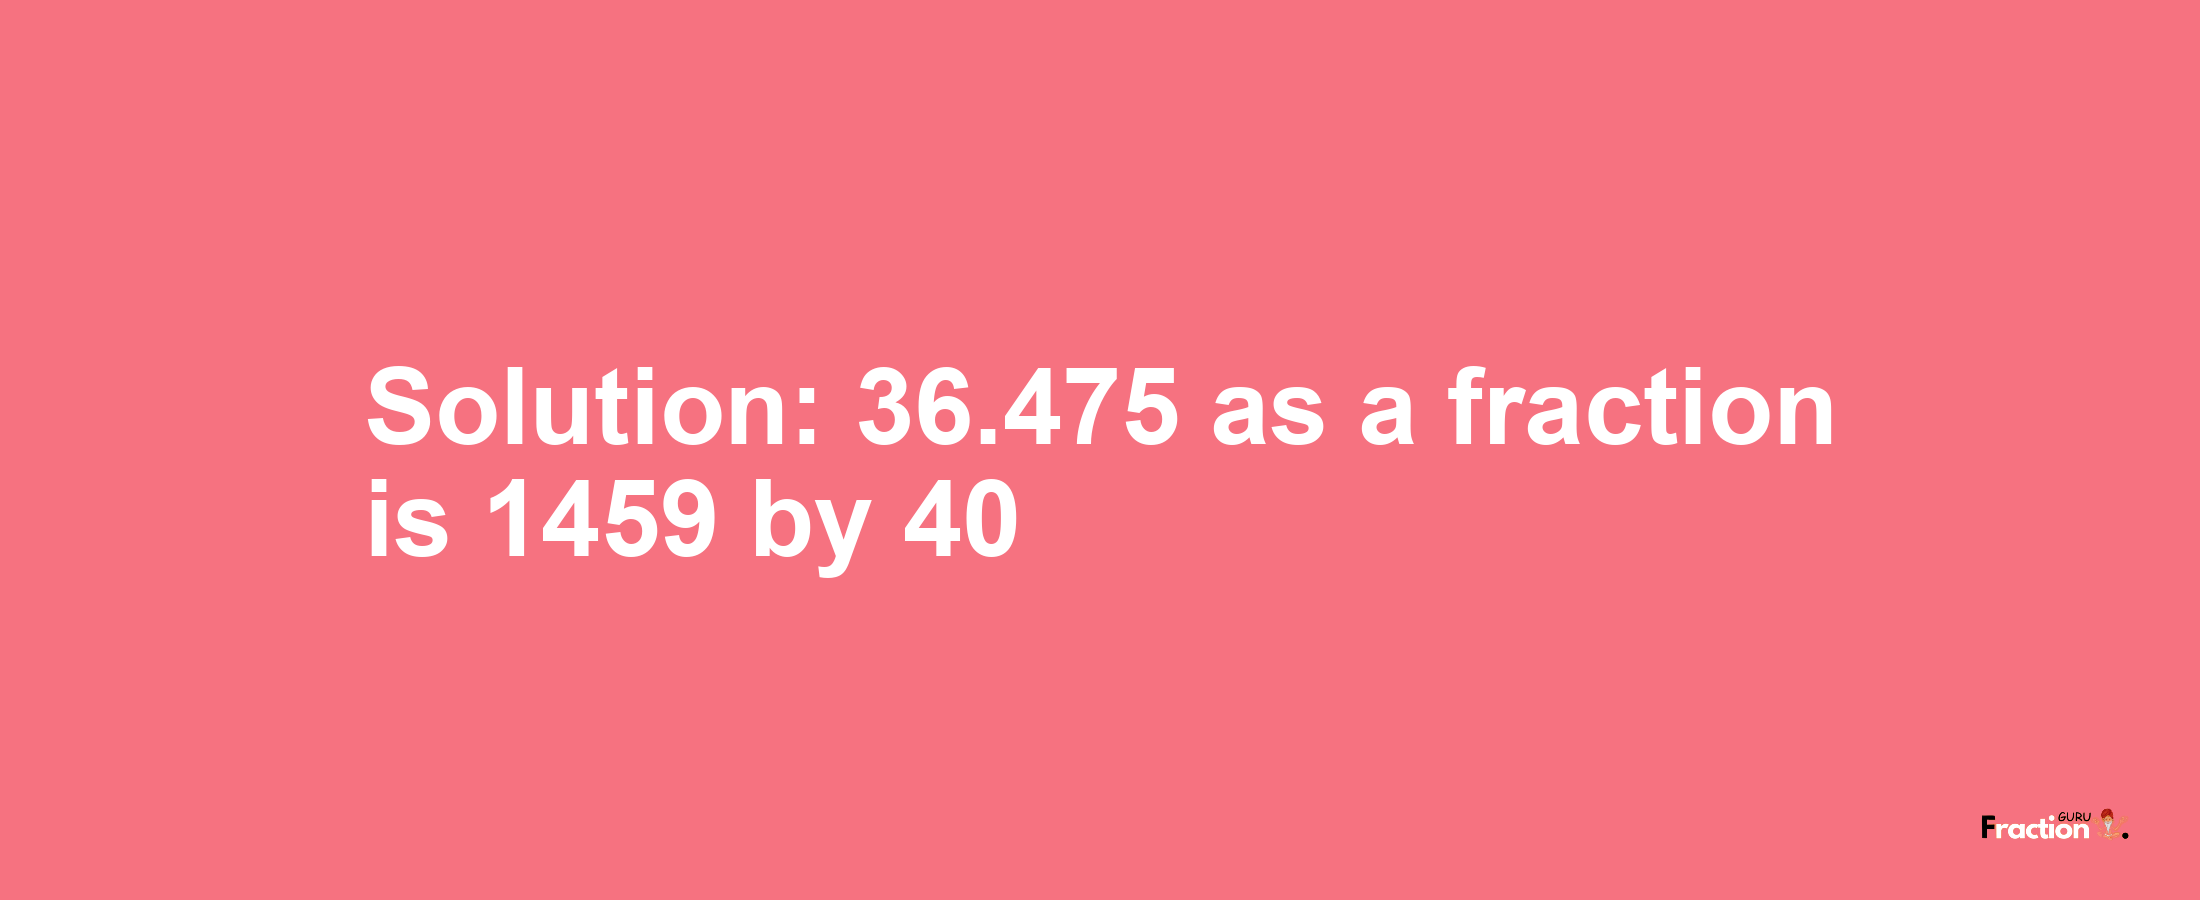 Solution:36.475 as a fraction is 1459/40